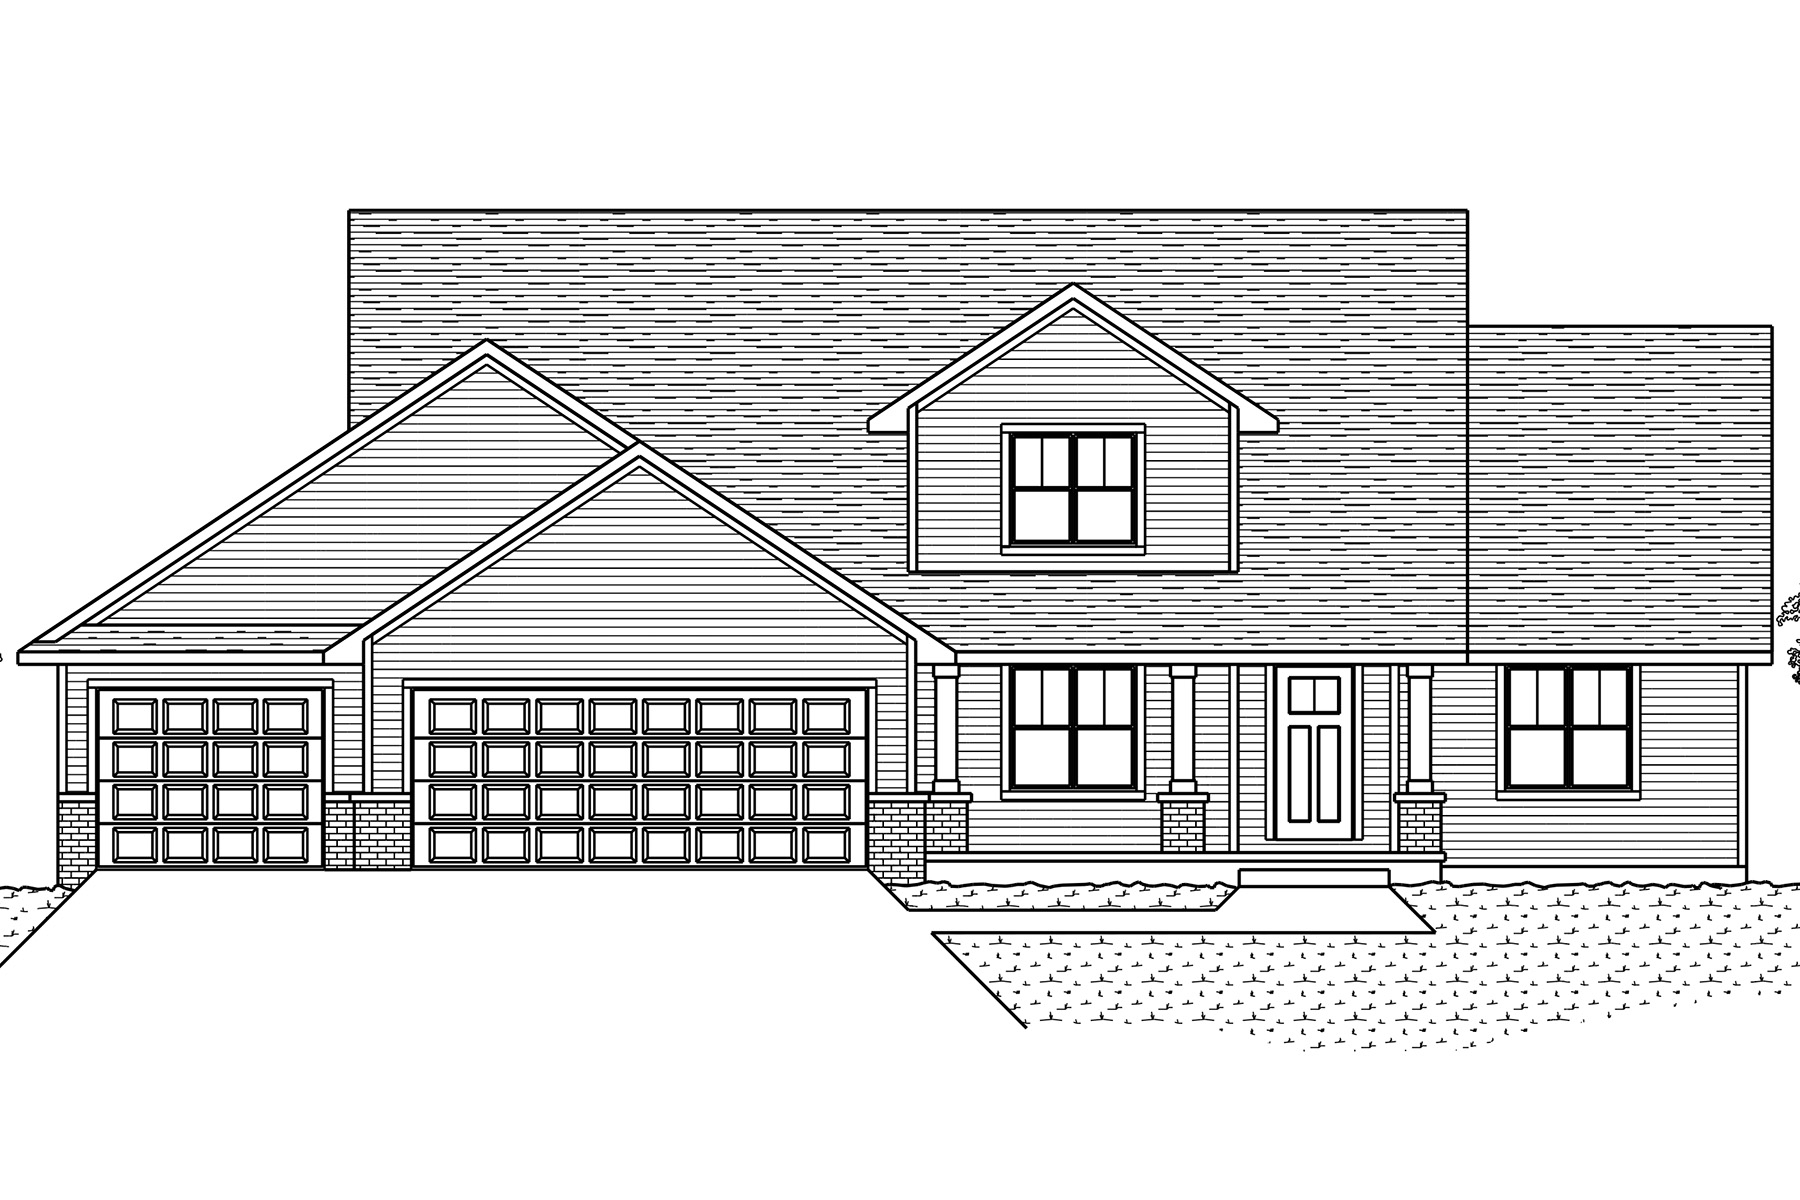 5012 Potters Crossing Elevation. 2,154 Sq Ft 1.5-Story Plan. 3 Bedrooms. 2.5 Bathrooms.